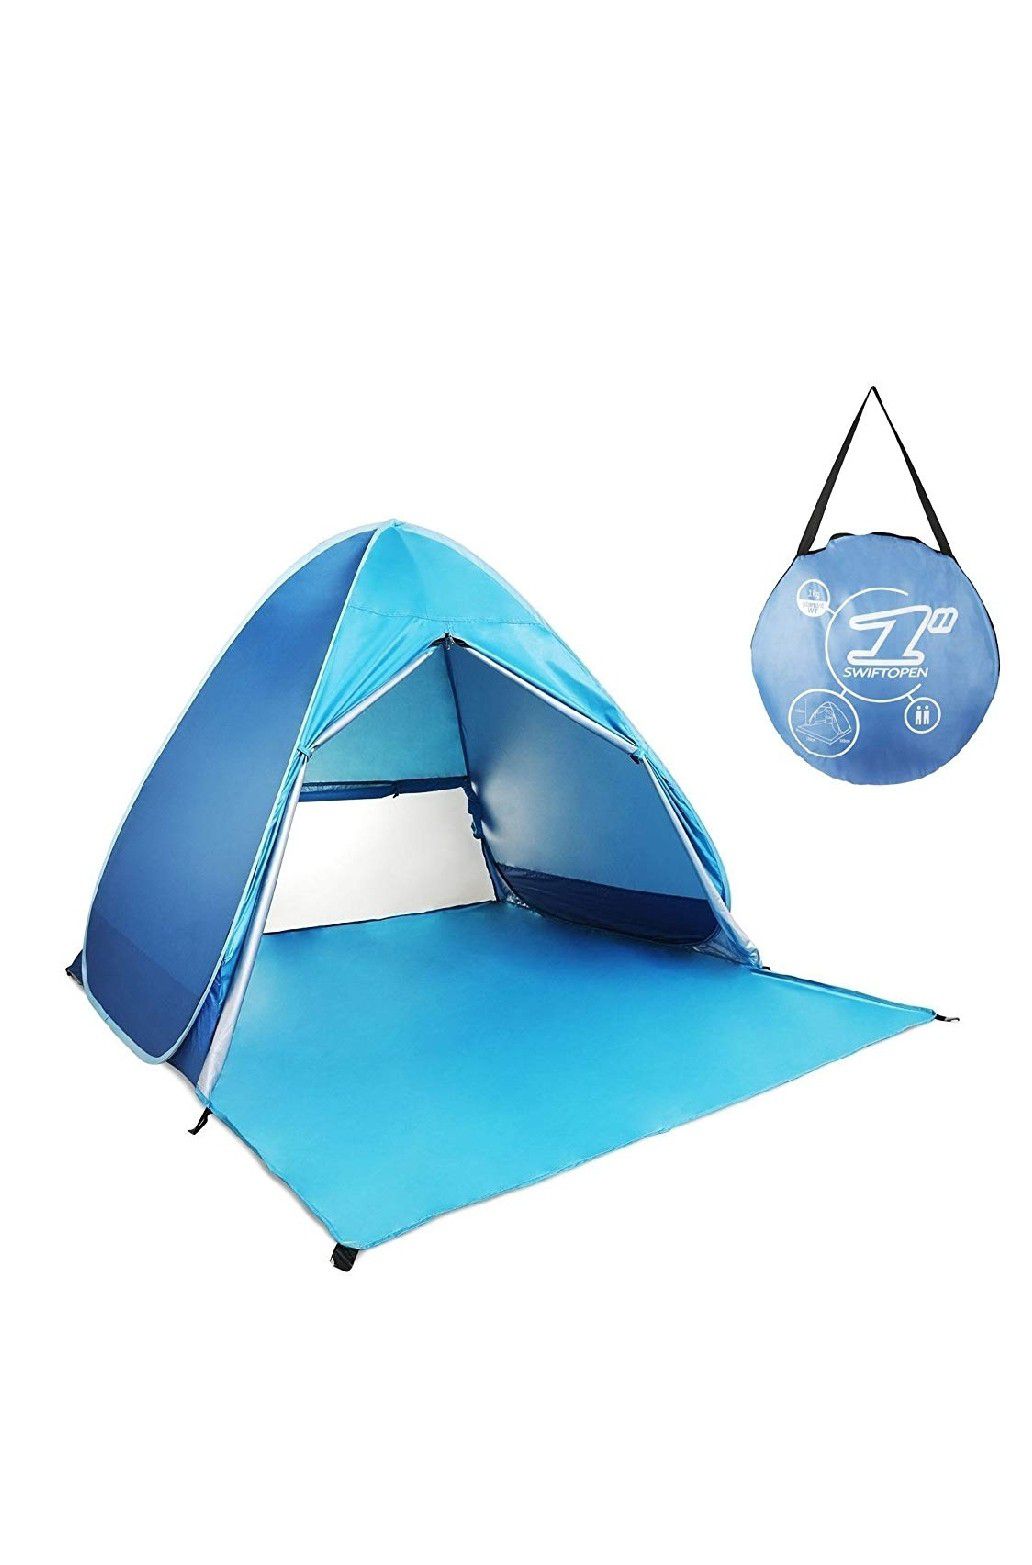 Camping, picnic, beach tent brand (new in a sealed Package) 60 available, perfec for beach or picnic kids love this tent like a playhouse